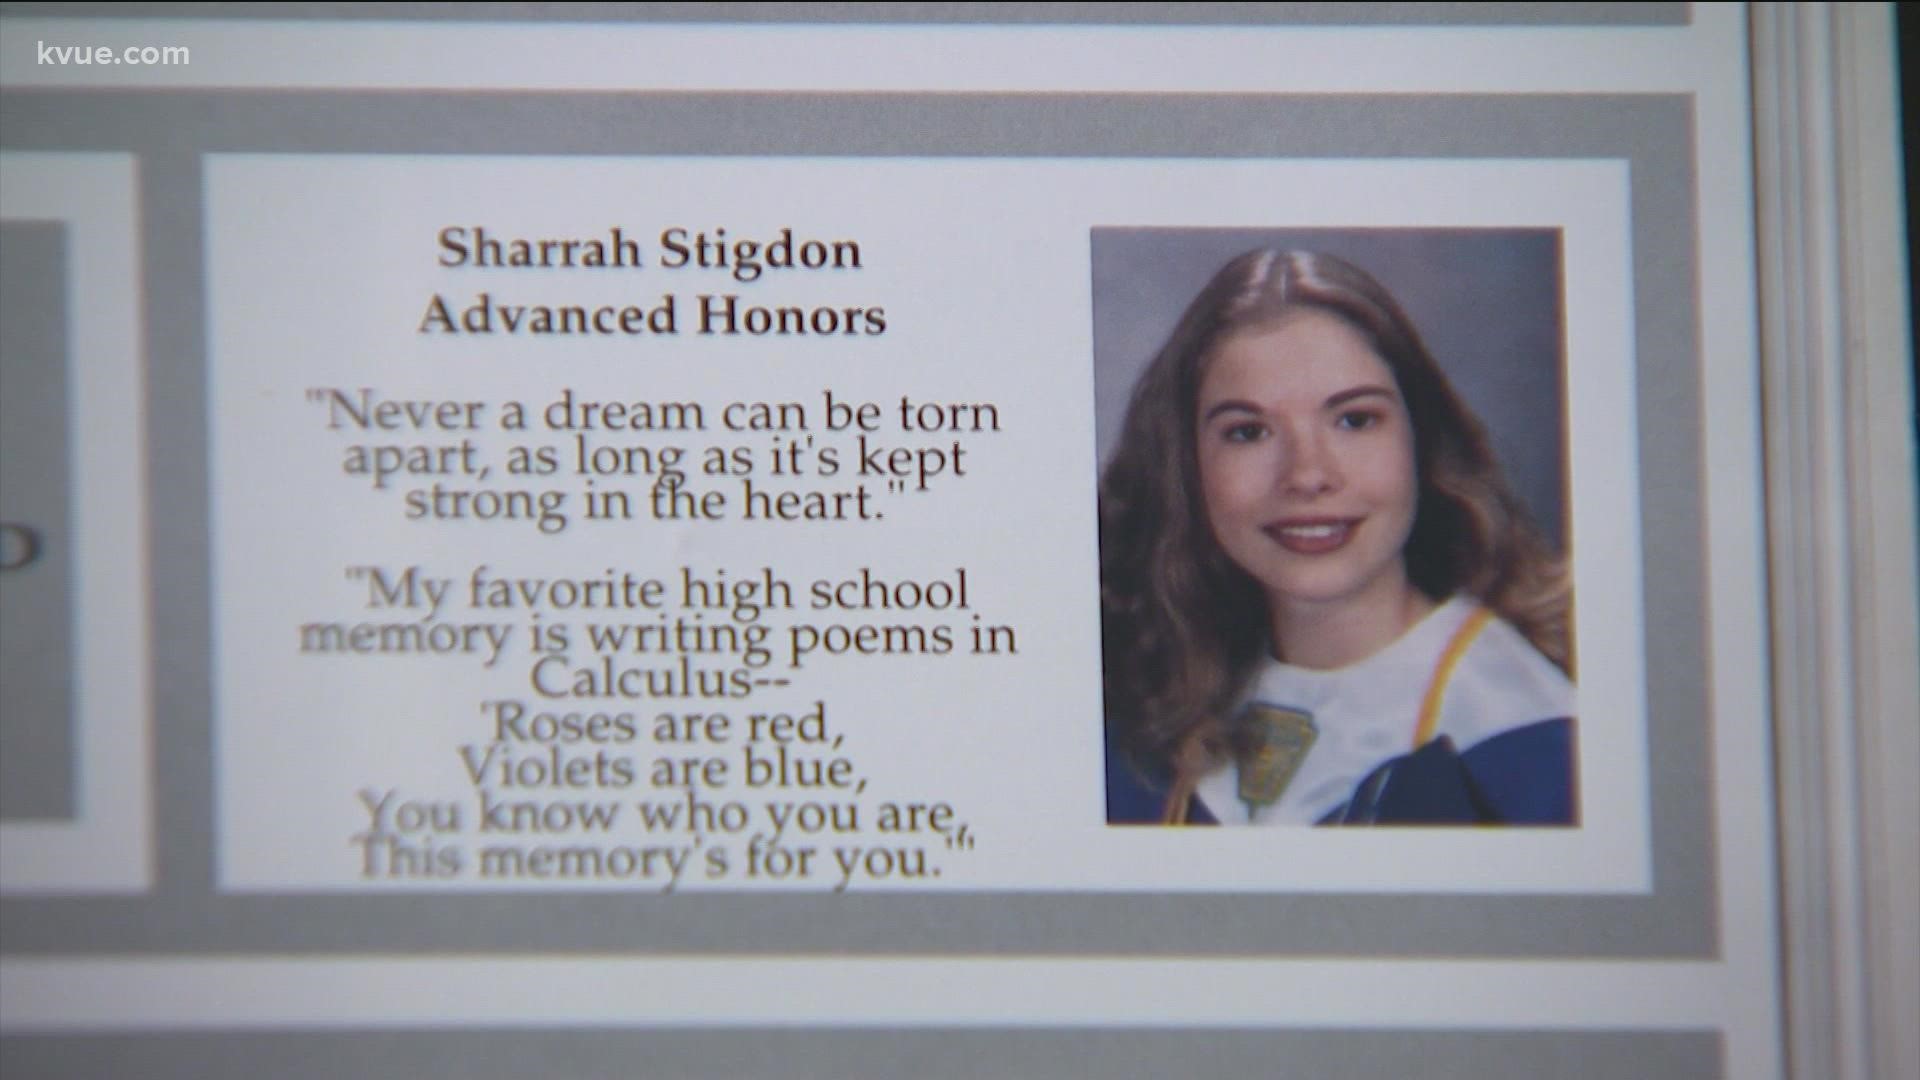 Sharrah Stigdon delivered a graduation speech days before the tornado hit the rural Central Texas town. Half of the 27 residents who died were her classmates.